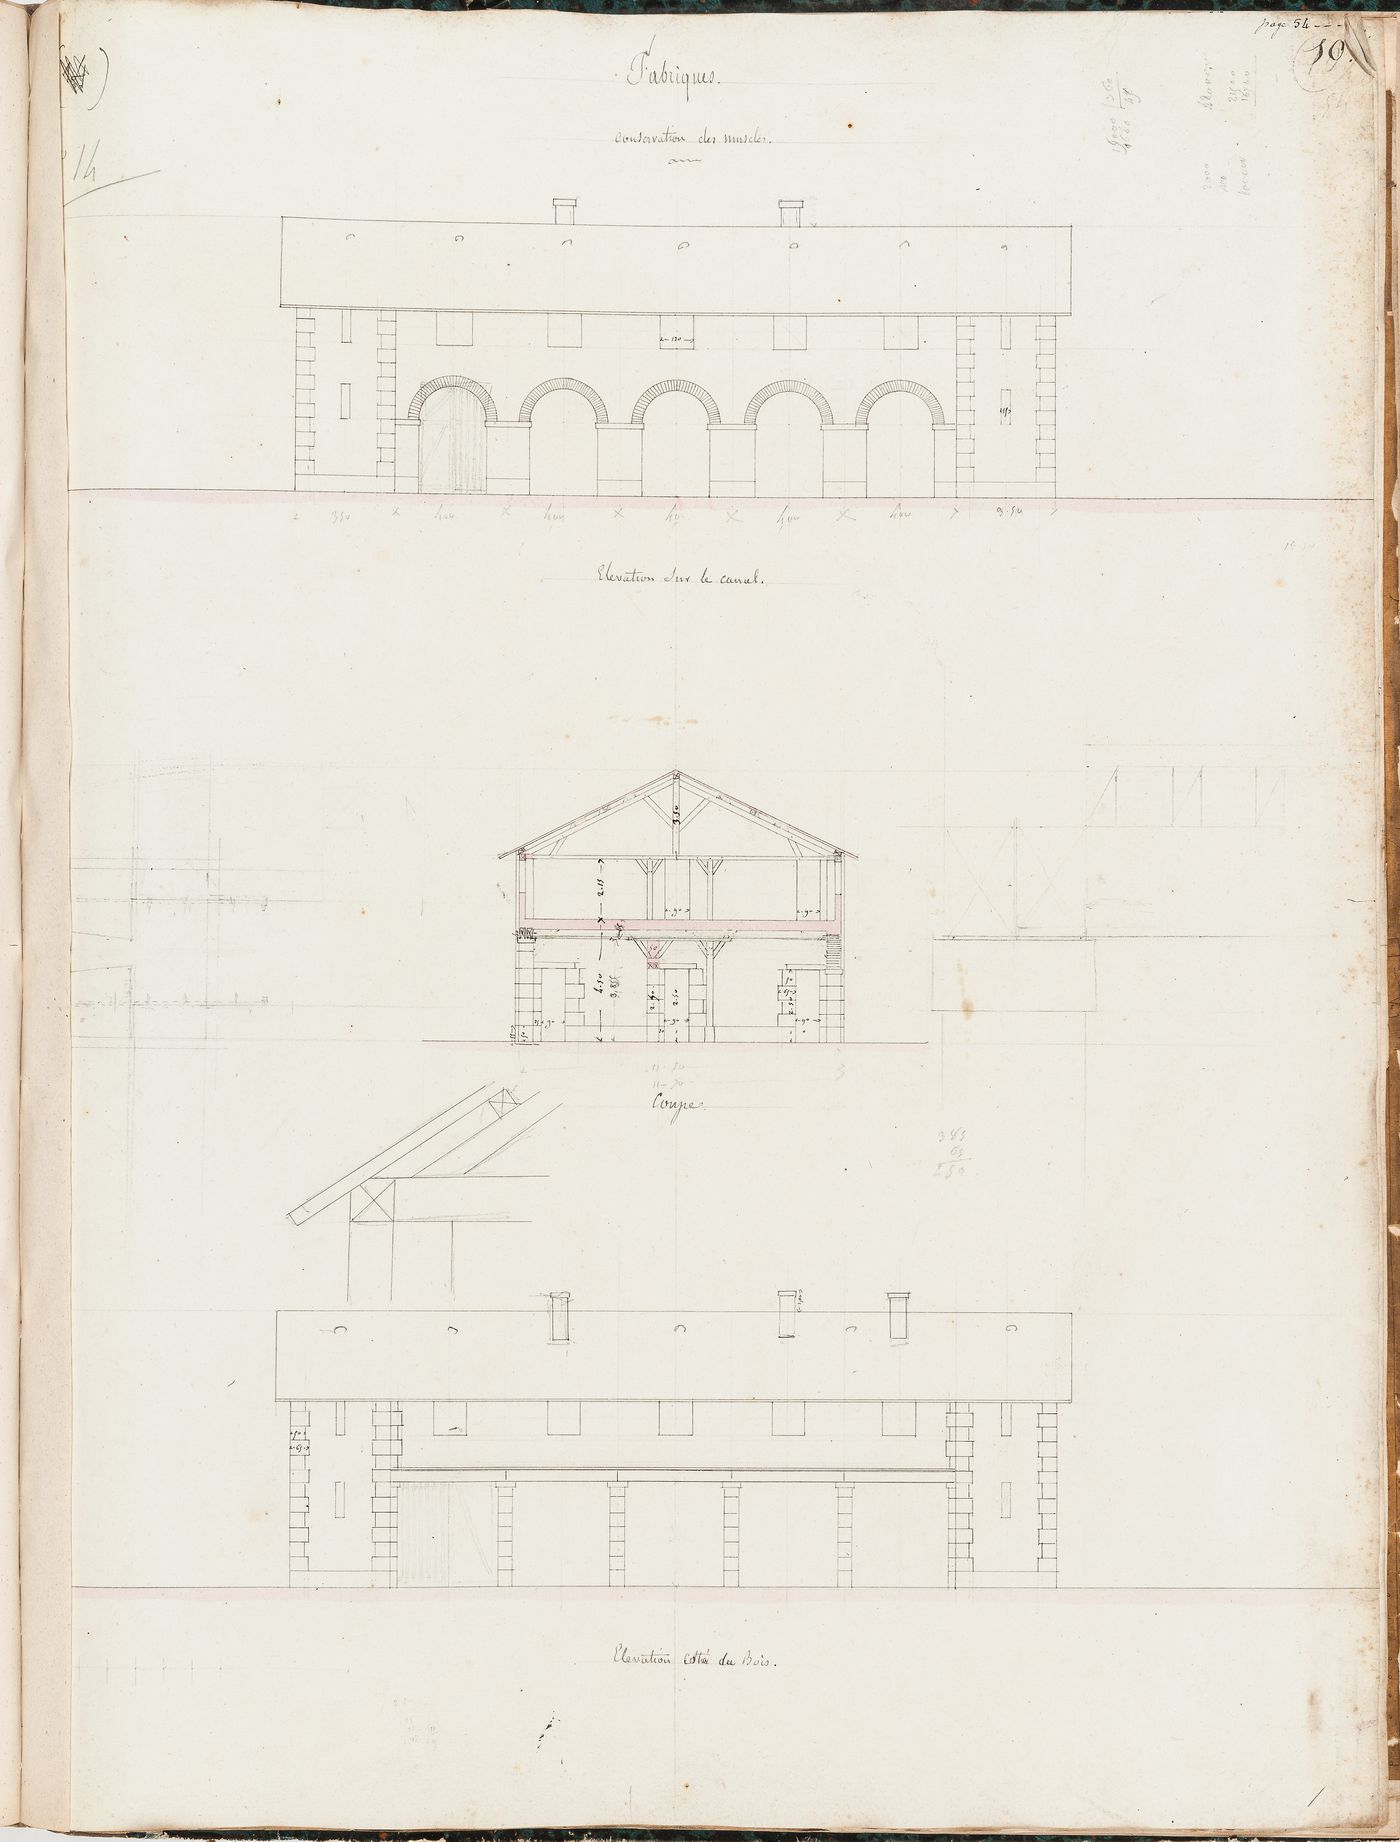 Project for Clos d'équarrissage, fôret de Bondy: Elevations, cross section, and detail for the factory for the preservation of muscles